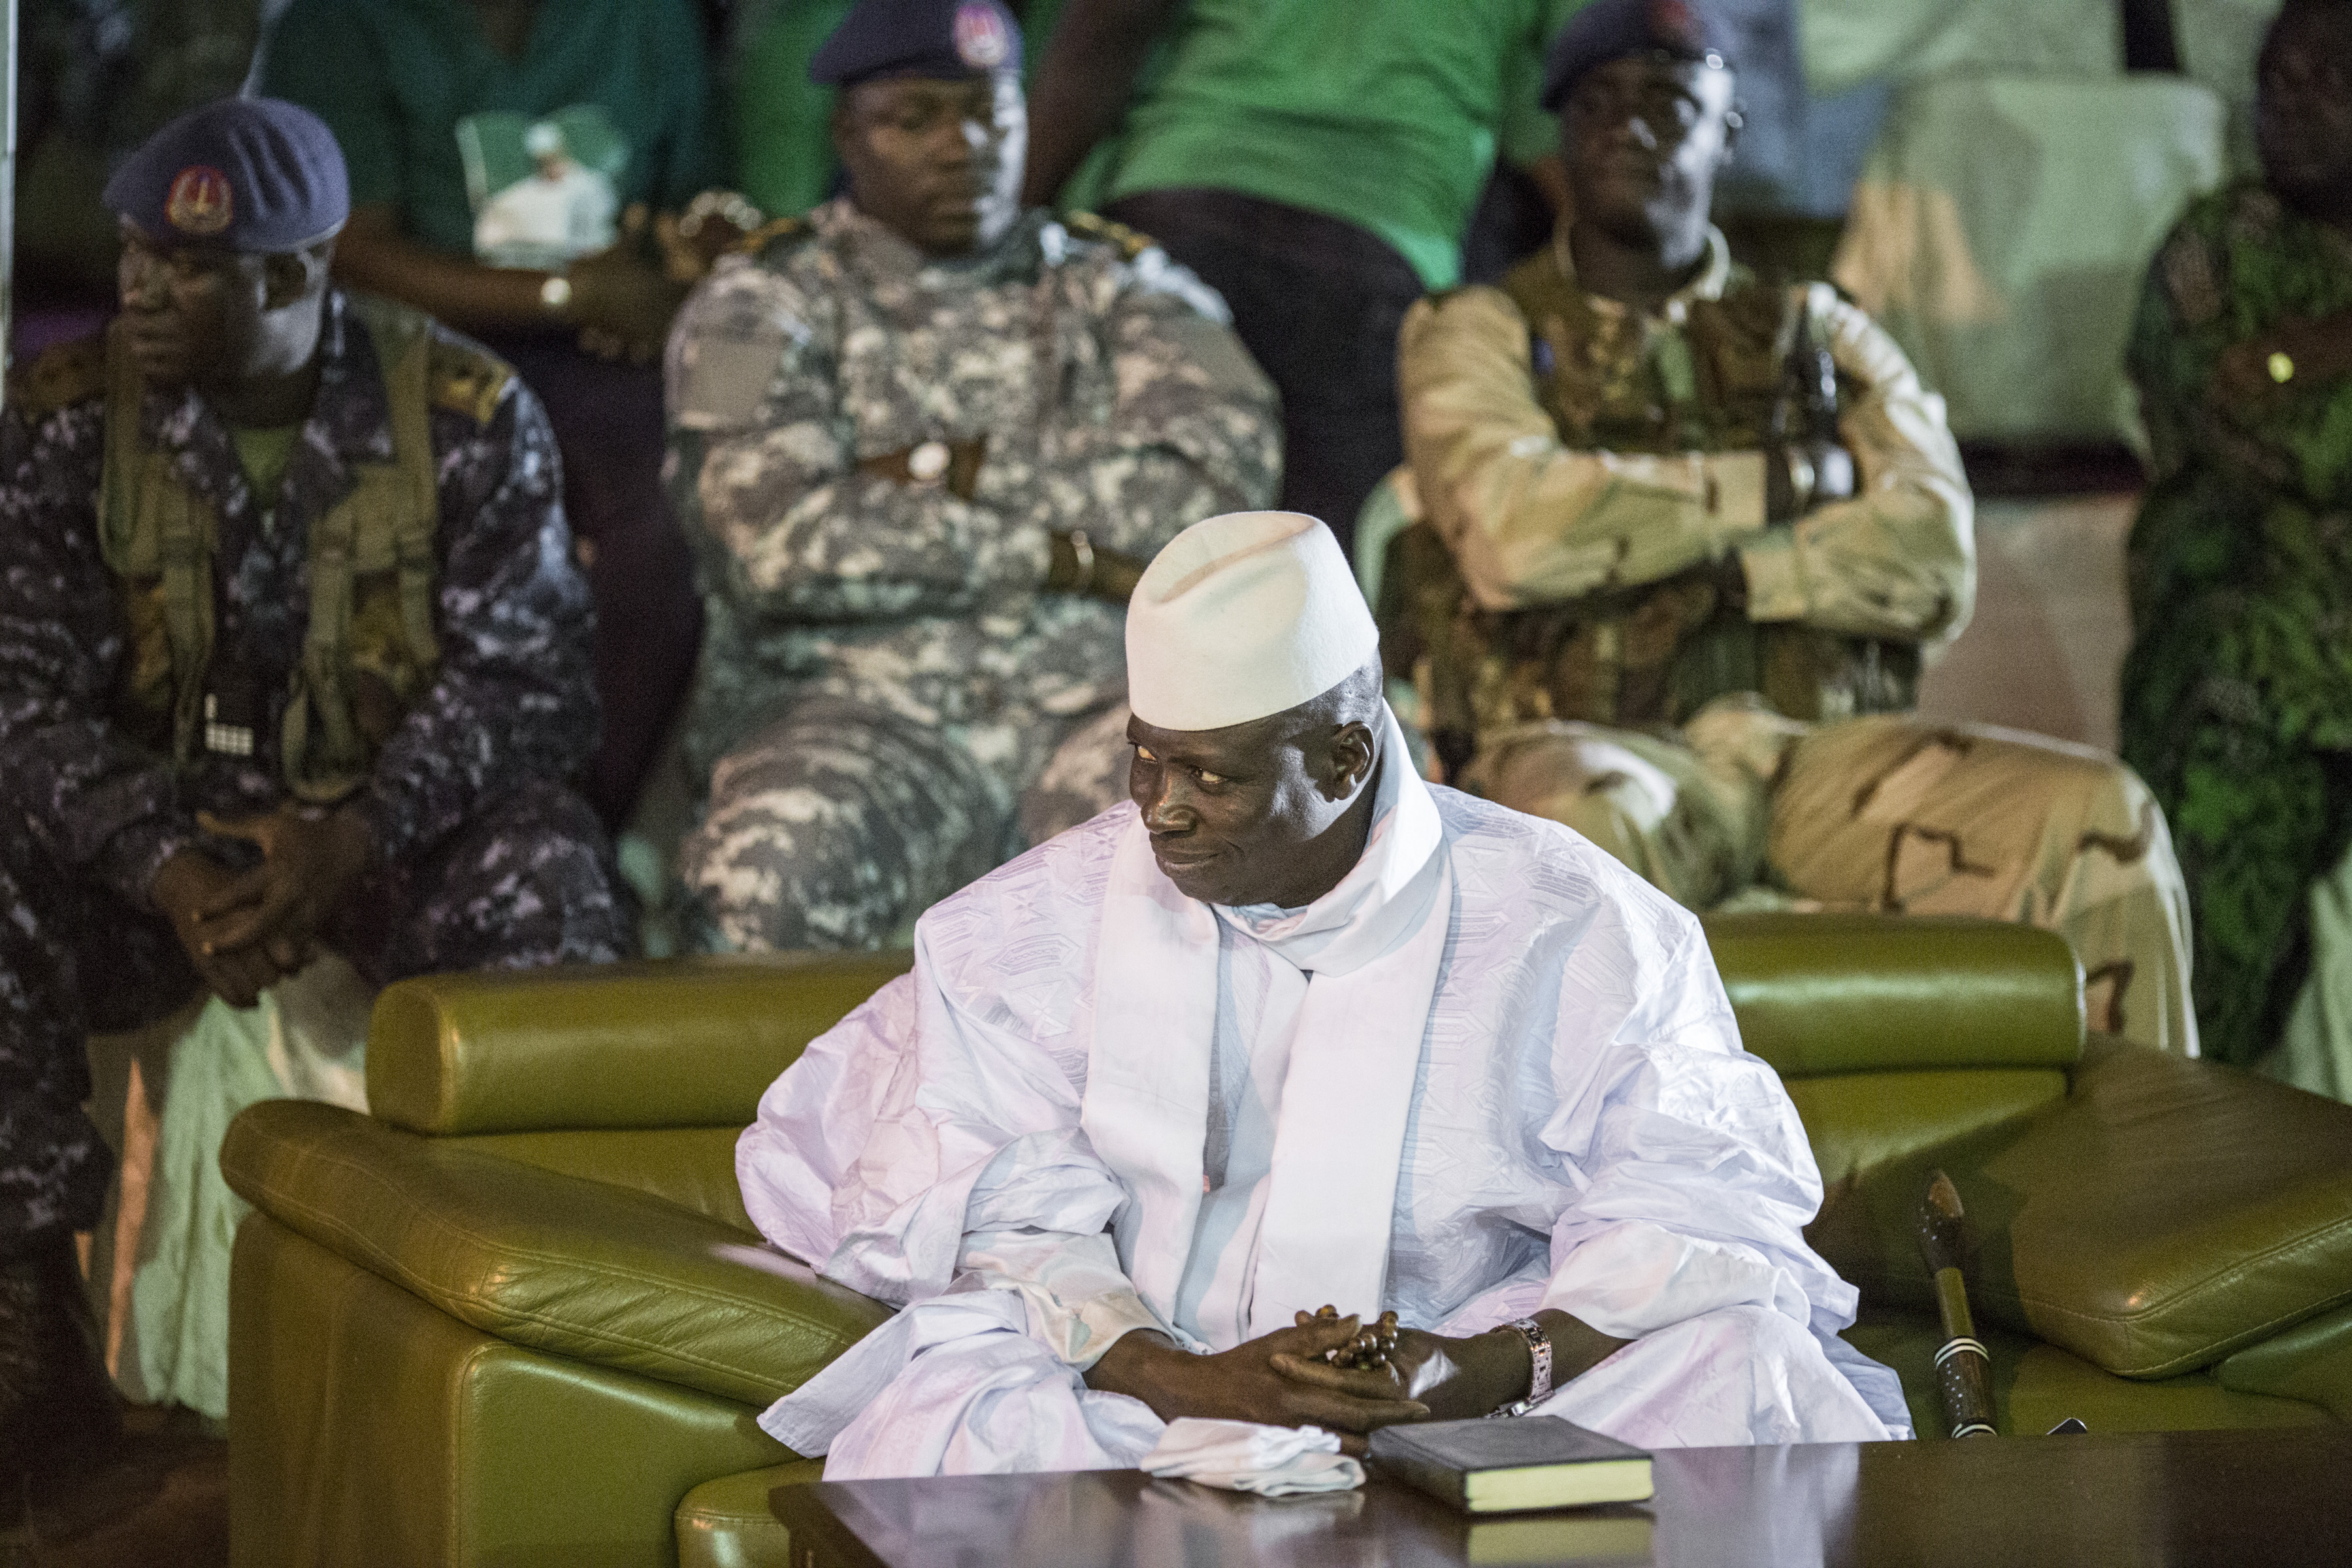 Incumbent Gambian President Yahya Jammeh looks on in Banjul on November 29, 2016, during the closing rally of the electoral campaign of the Alliance for Patriotic Reorientation and Construction (APRC). (Marco Longari—AFP/Getty Images)